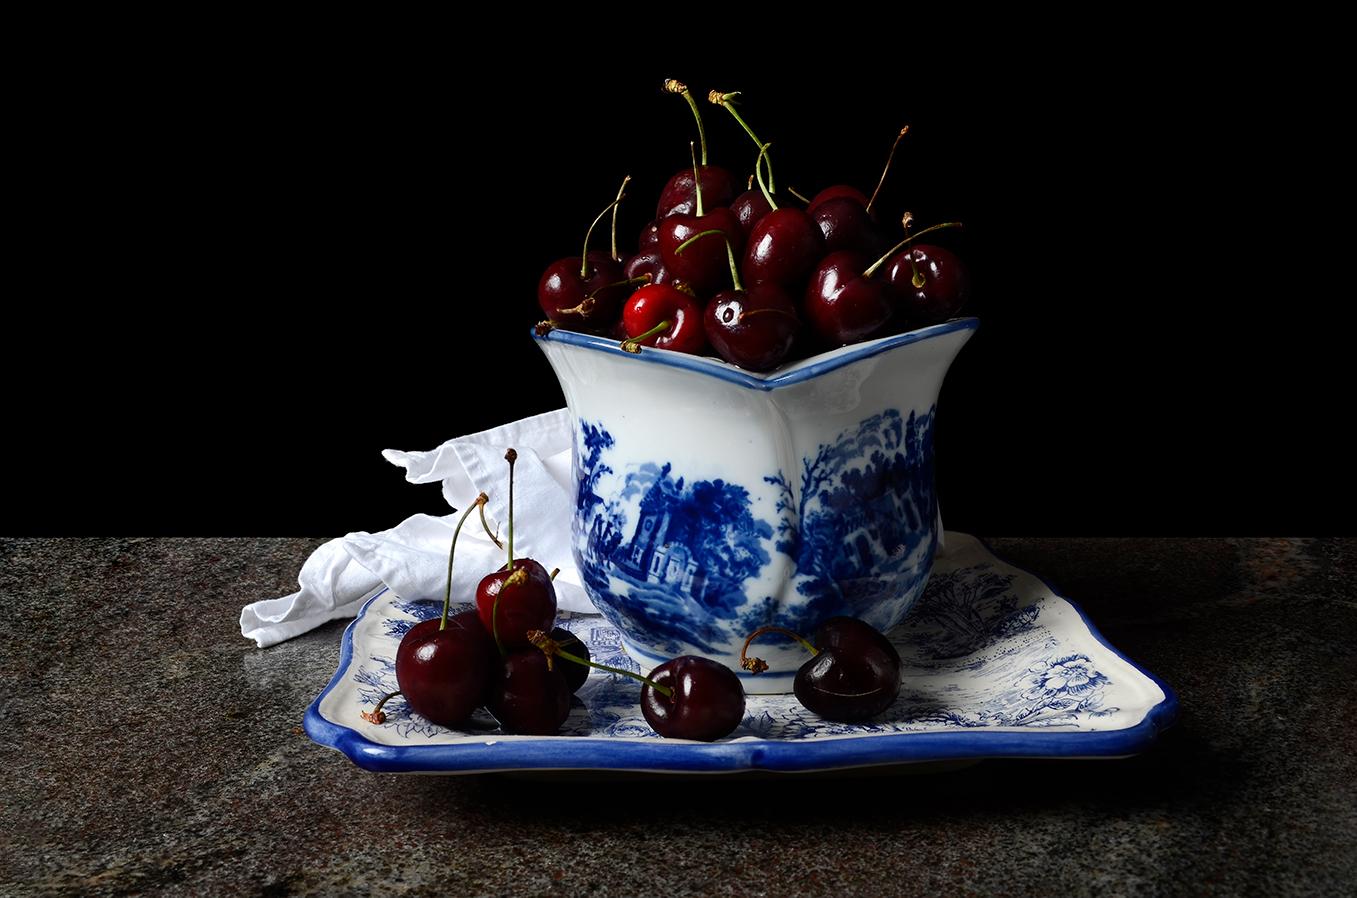 Dora Franco Color Photograph - Cerezas. From The Bodegones still life color photography  series